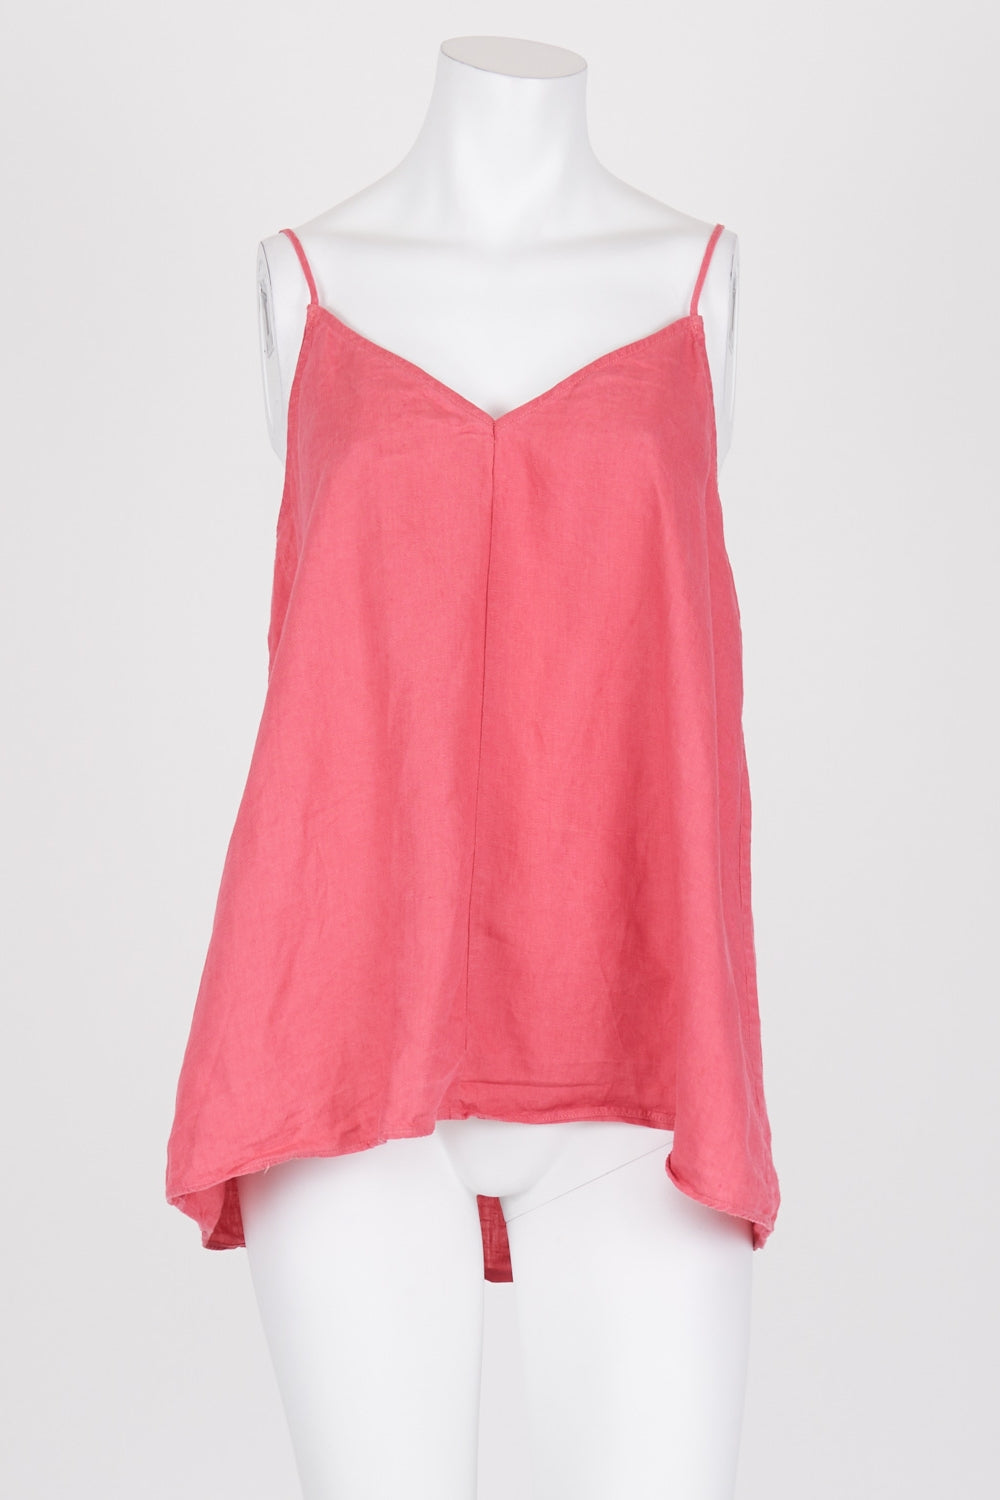 Country Road Pink 100% French Linen Top 12